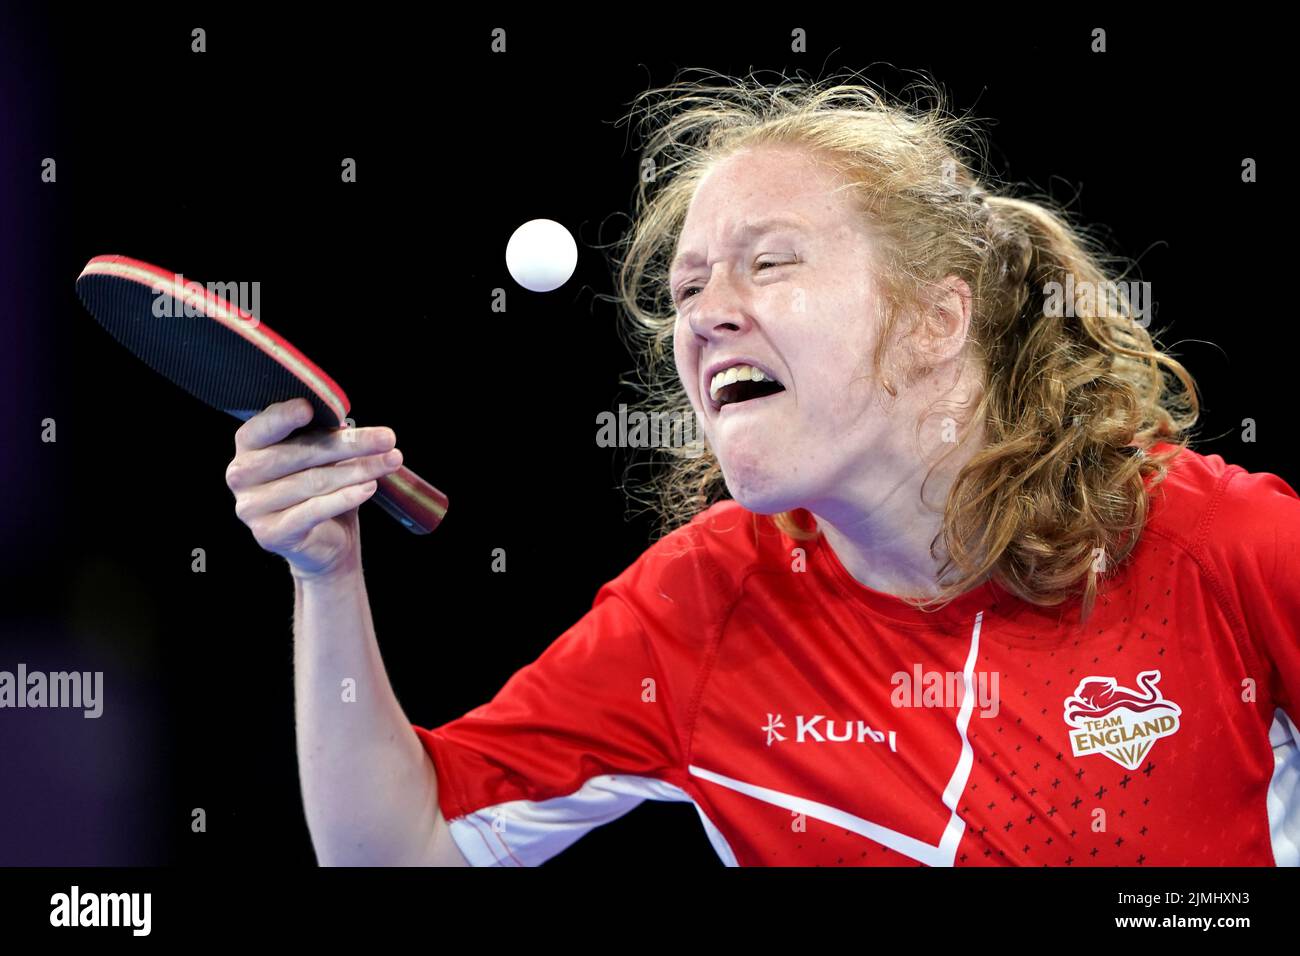 England 's Felicity Pickard in action against Nigeria's Faith Obazuaye during the Table Tennis Women's Singles Classes 6-10 - Bronze Medal Matchat The NEC on day nine of the 2022 Commonwealth Games in Birmingham. Picture date: Saturday August 6, 2022. Stock Photo